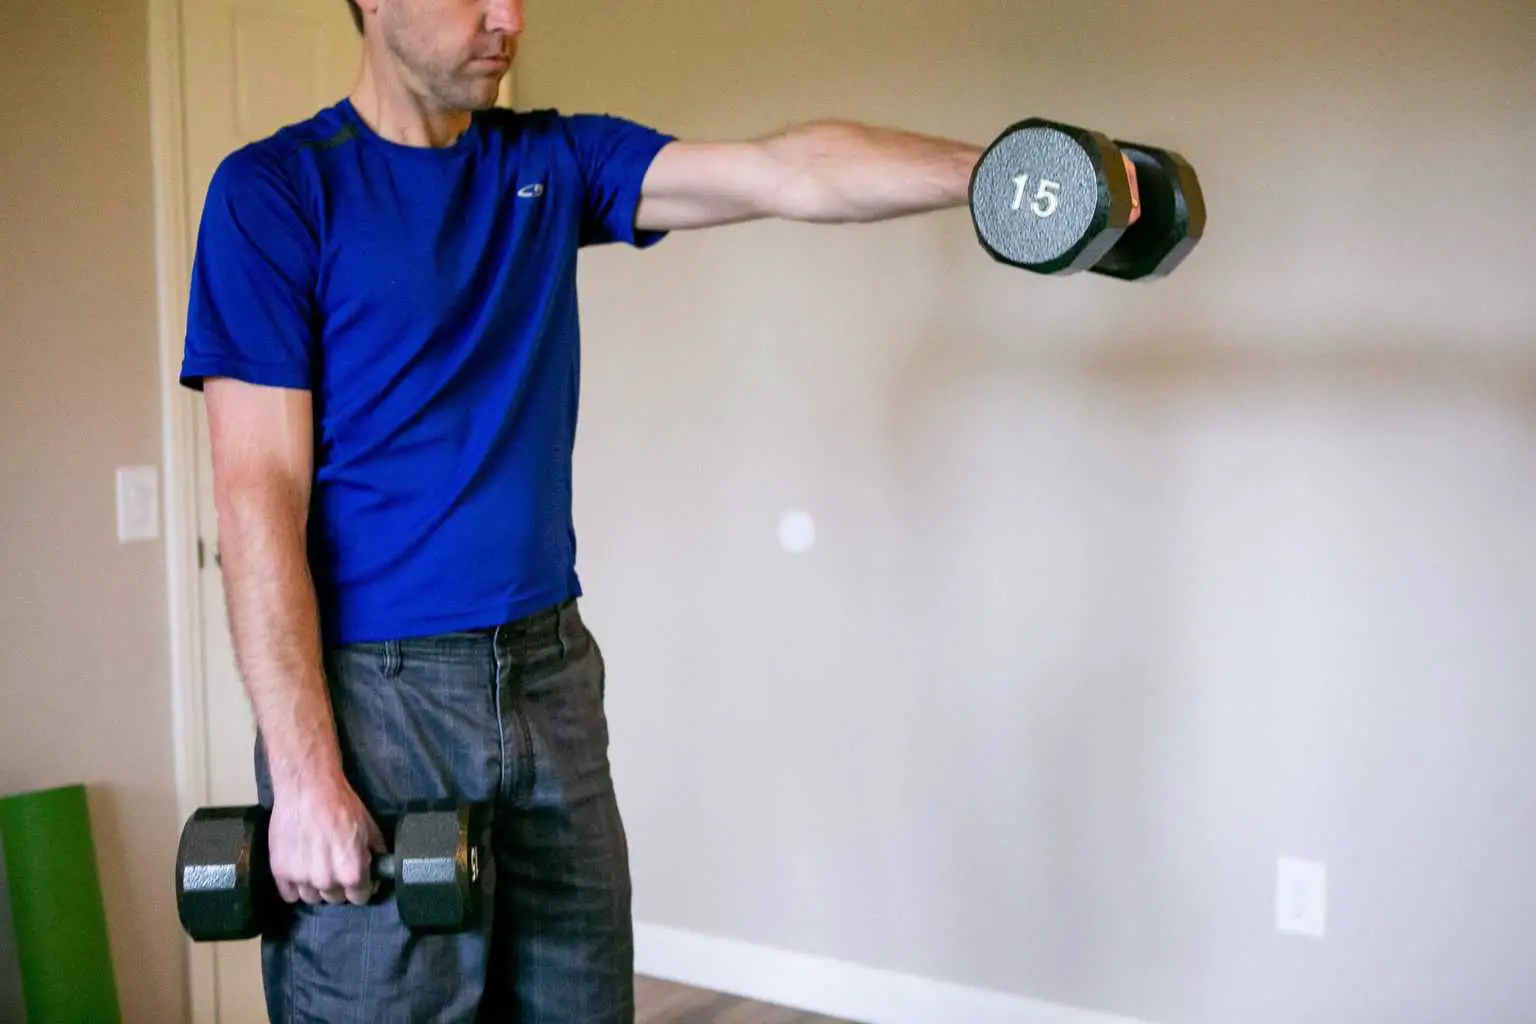 Man lifting a dumbbell while the other hand is holding another one on his side